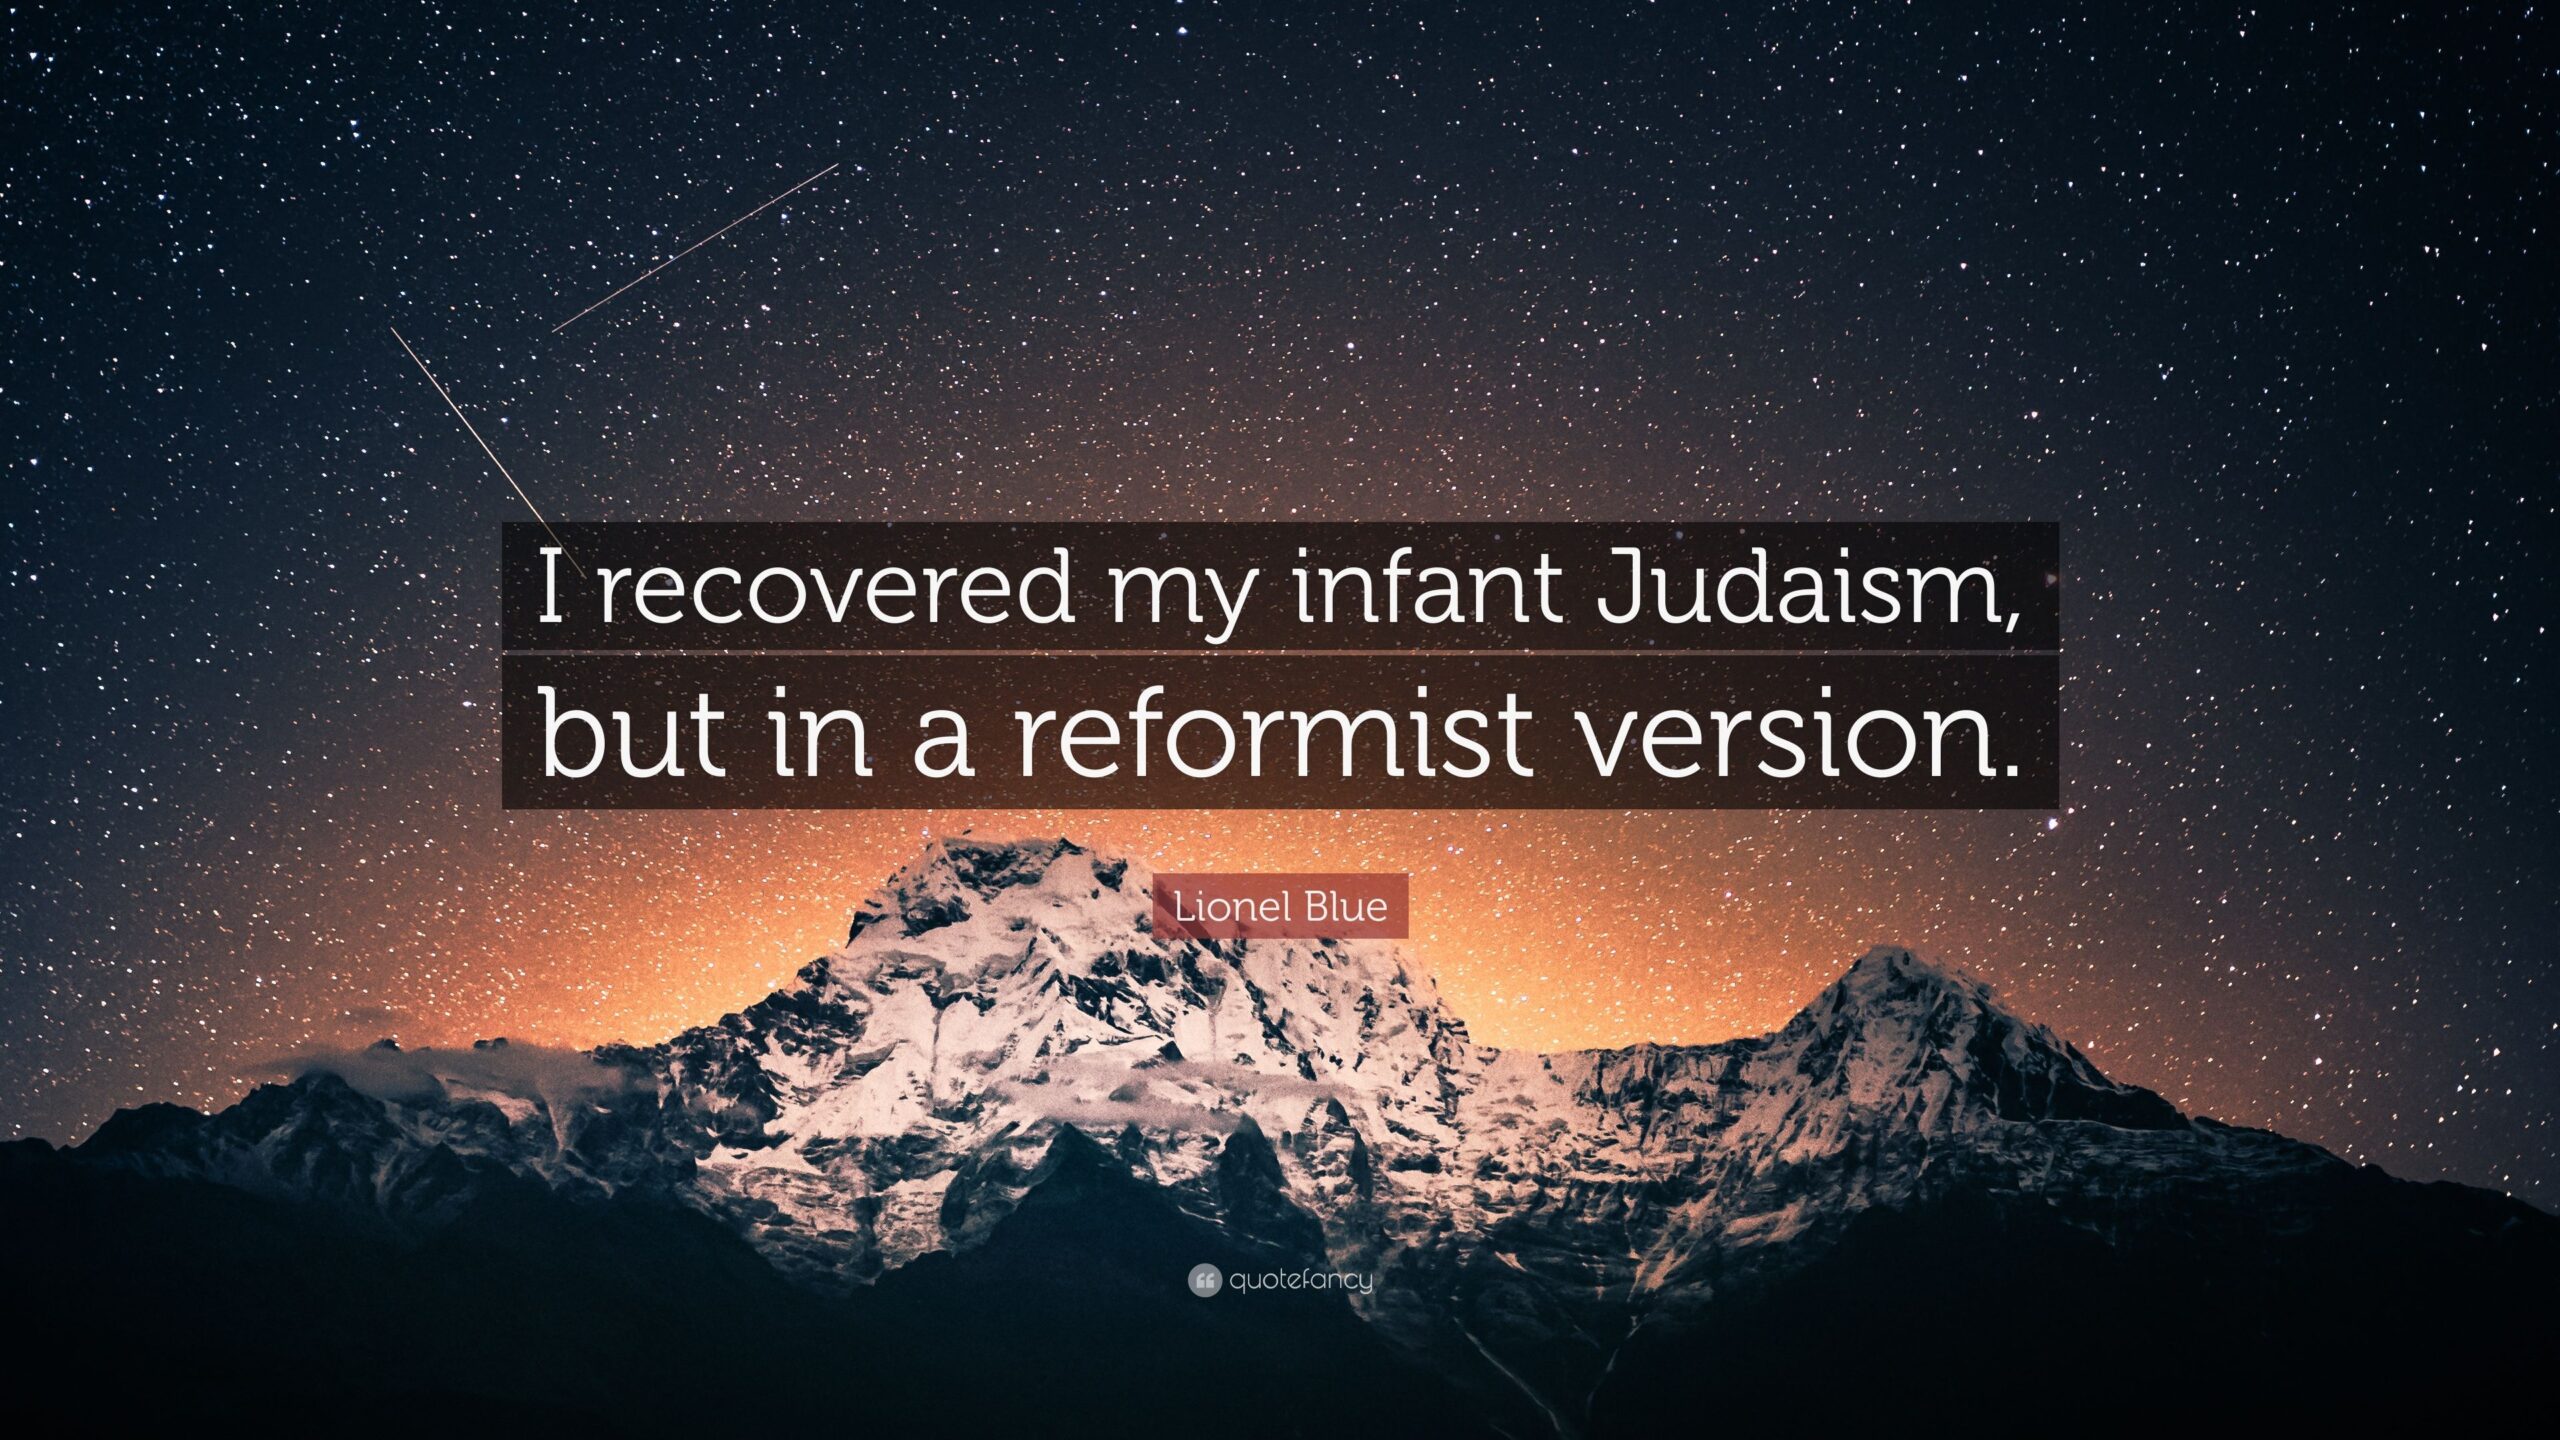 Lionel Blue Quote “I recovered my infant Judaism, but in a